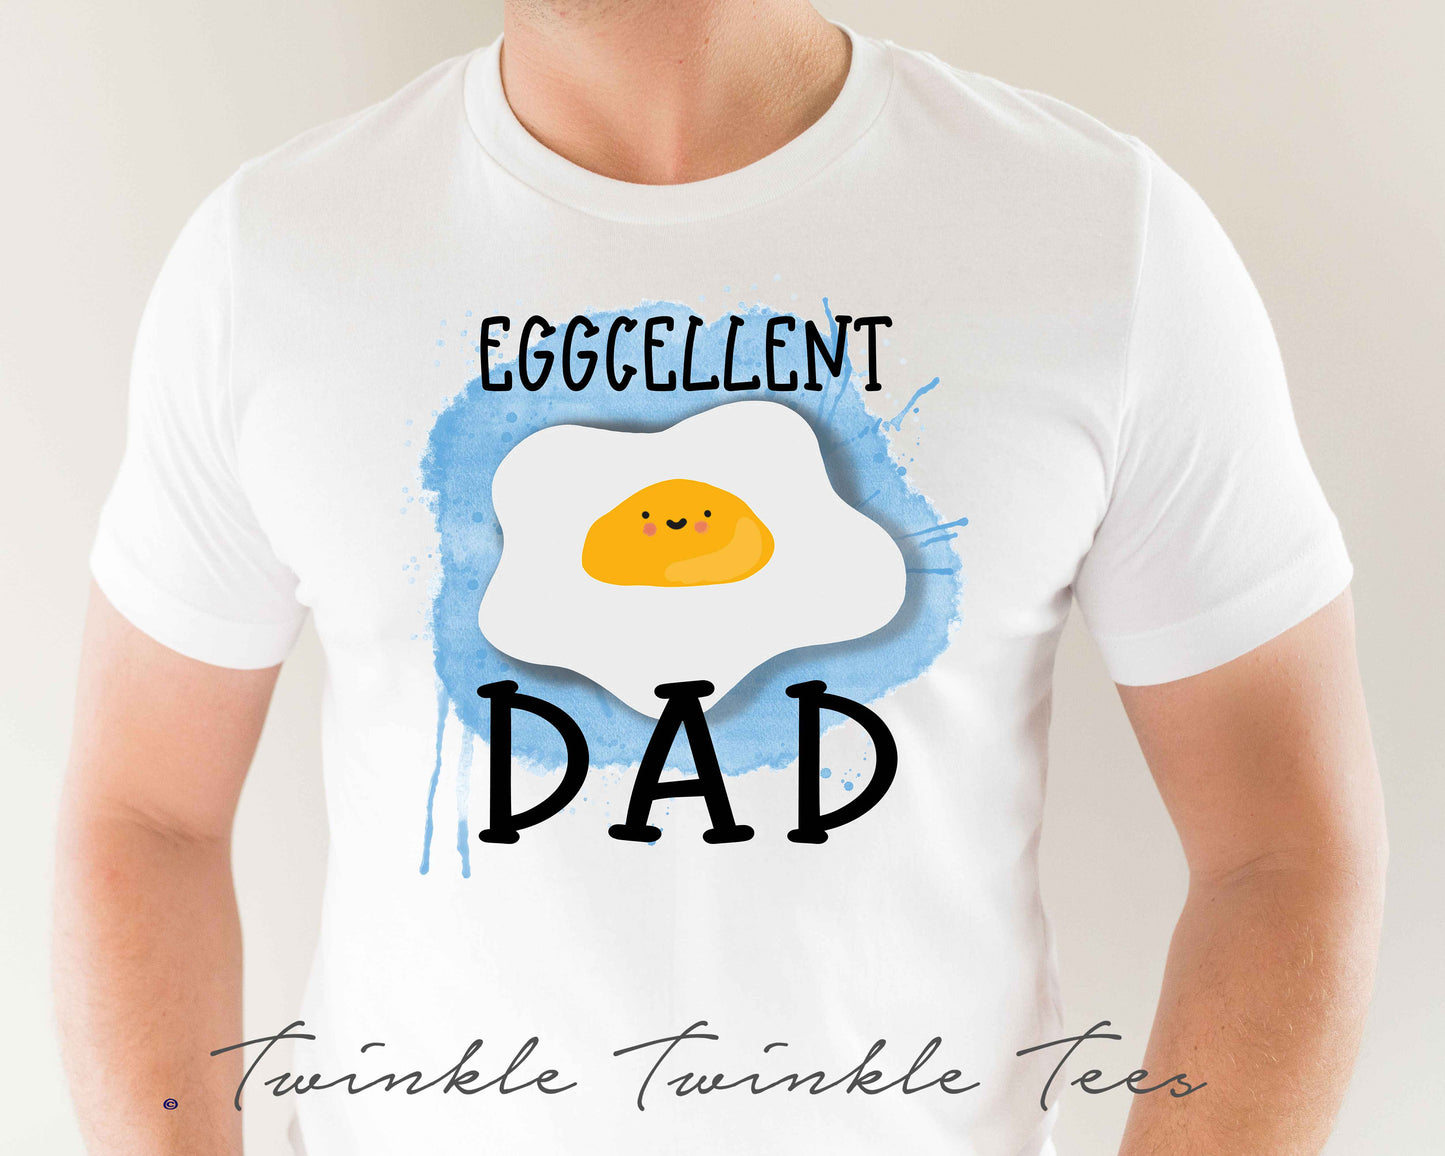 Eggcellent Dad t-shirt - father's day shirt - dad gift